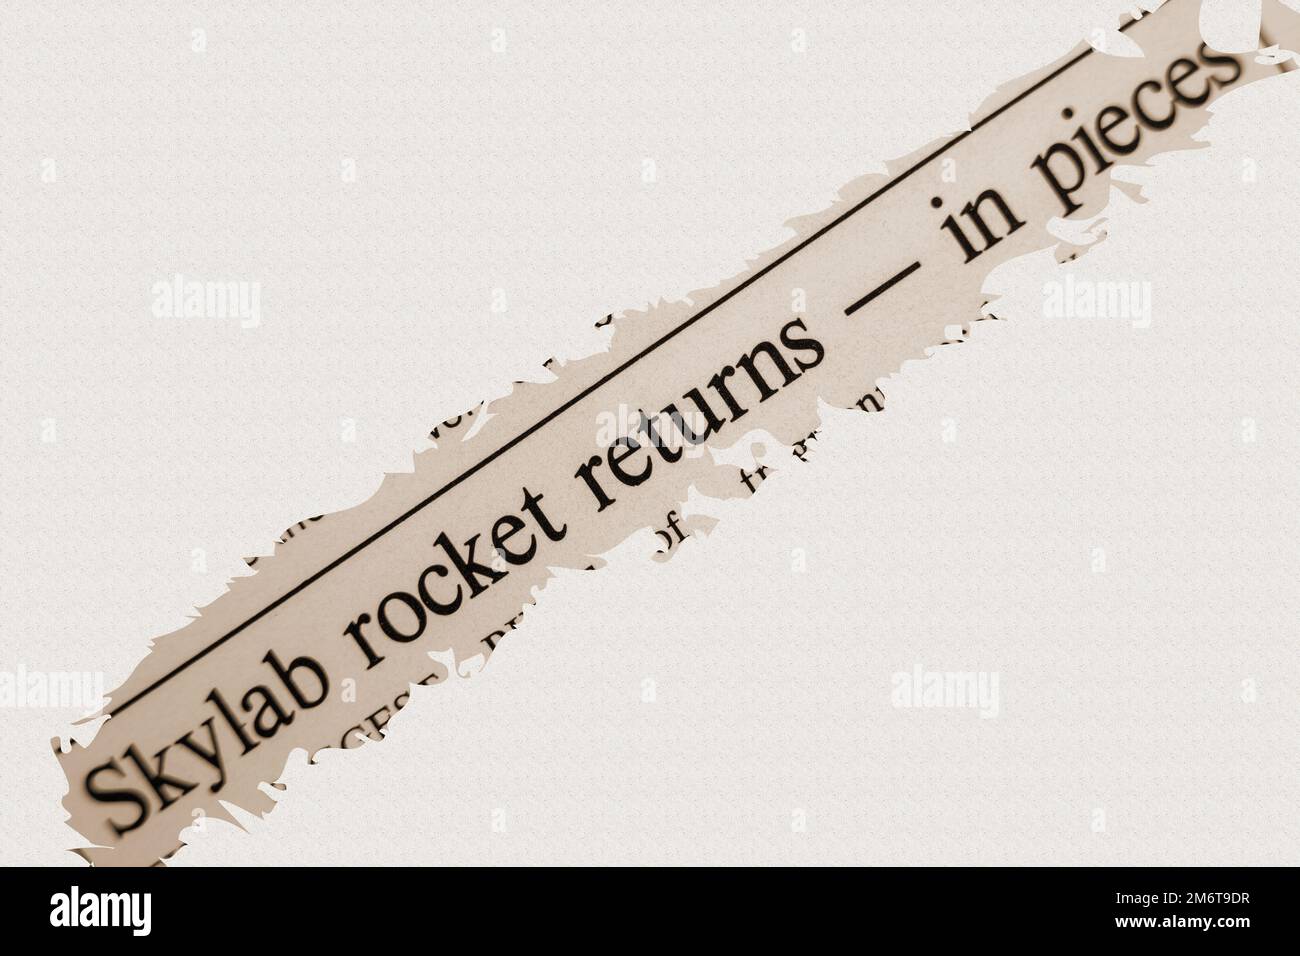 news story from 1975 newspaper headline article title - Skylab rocket returns - in pieces in sepia Stock Photo